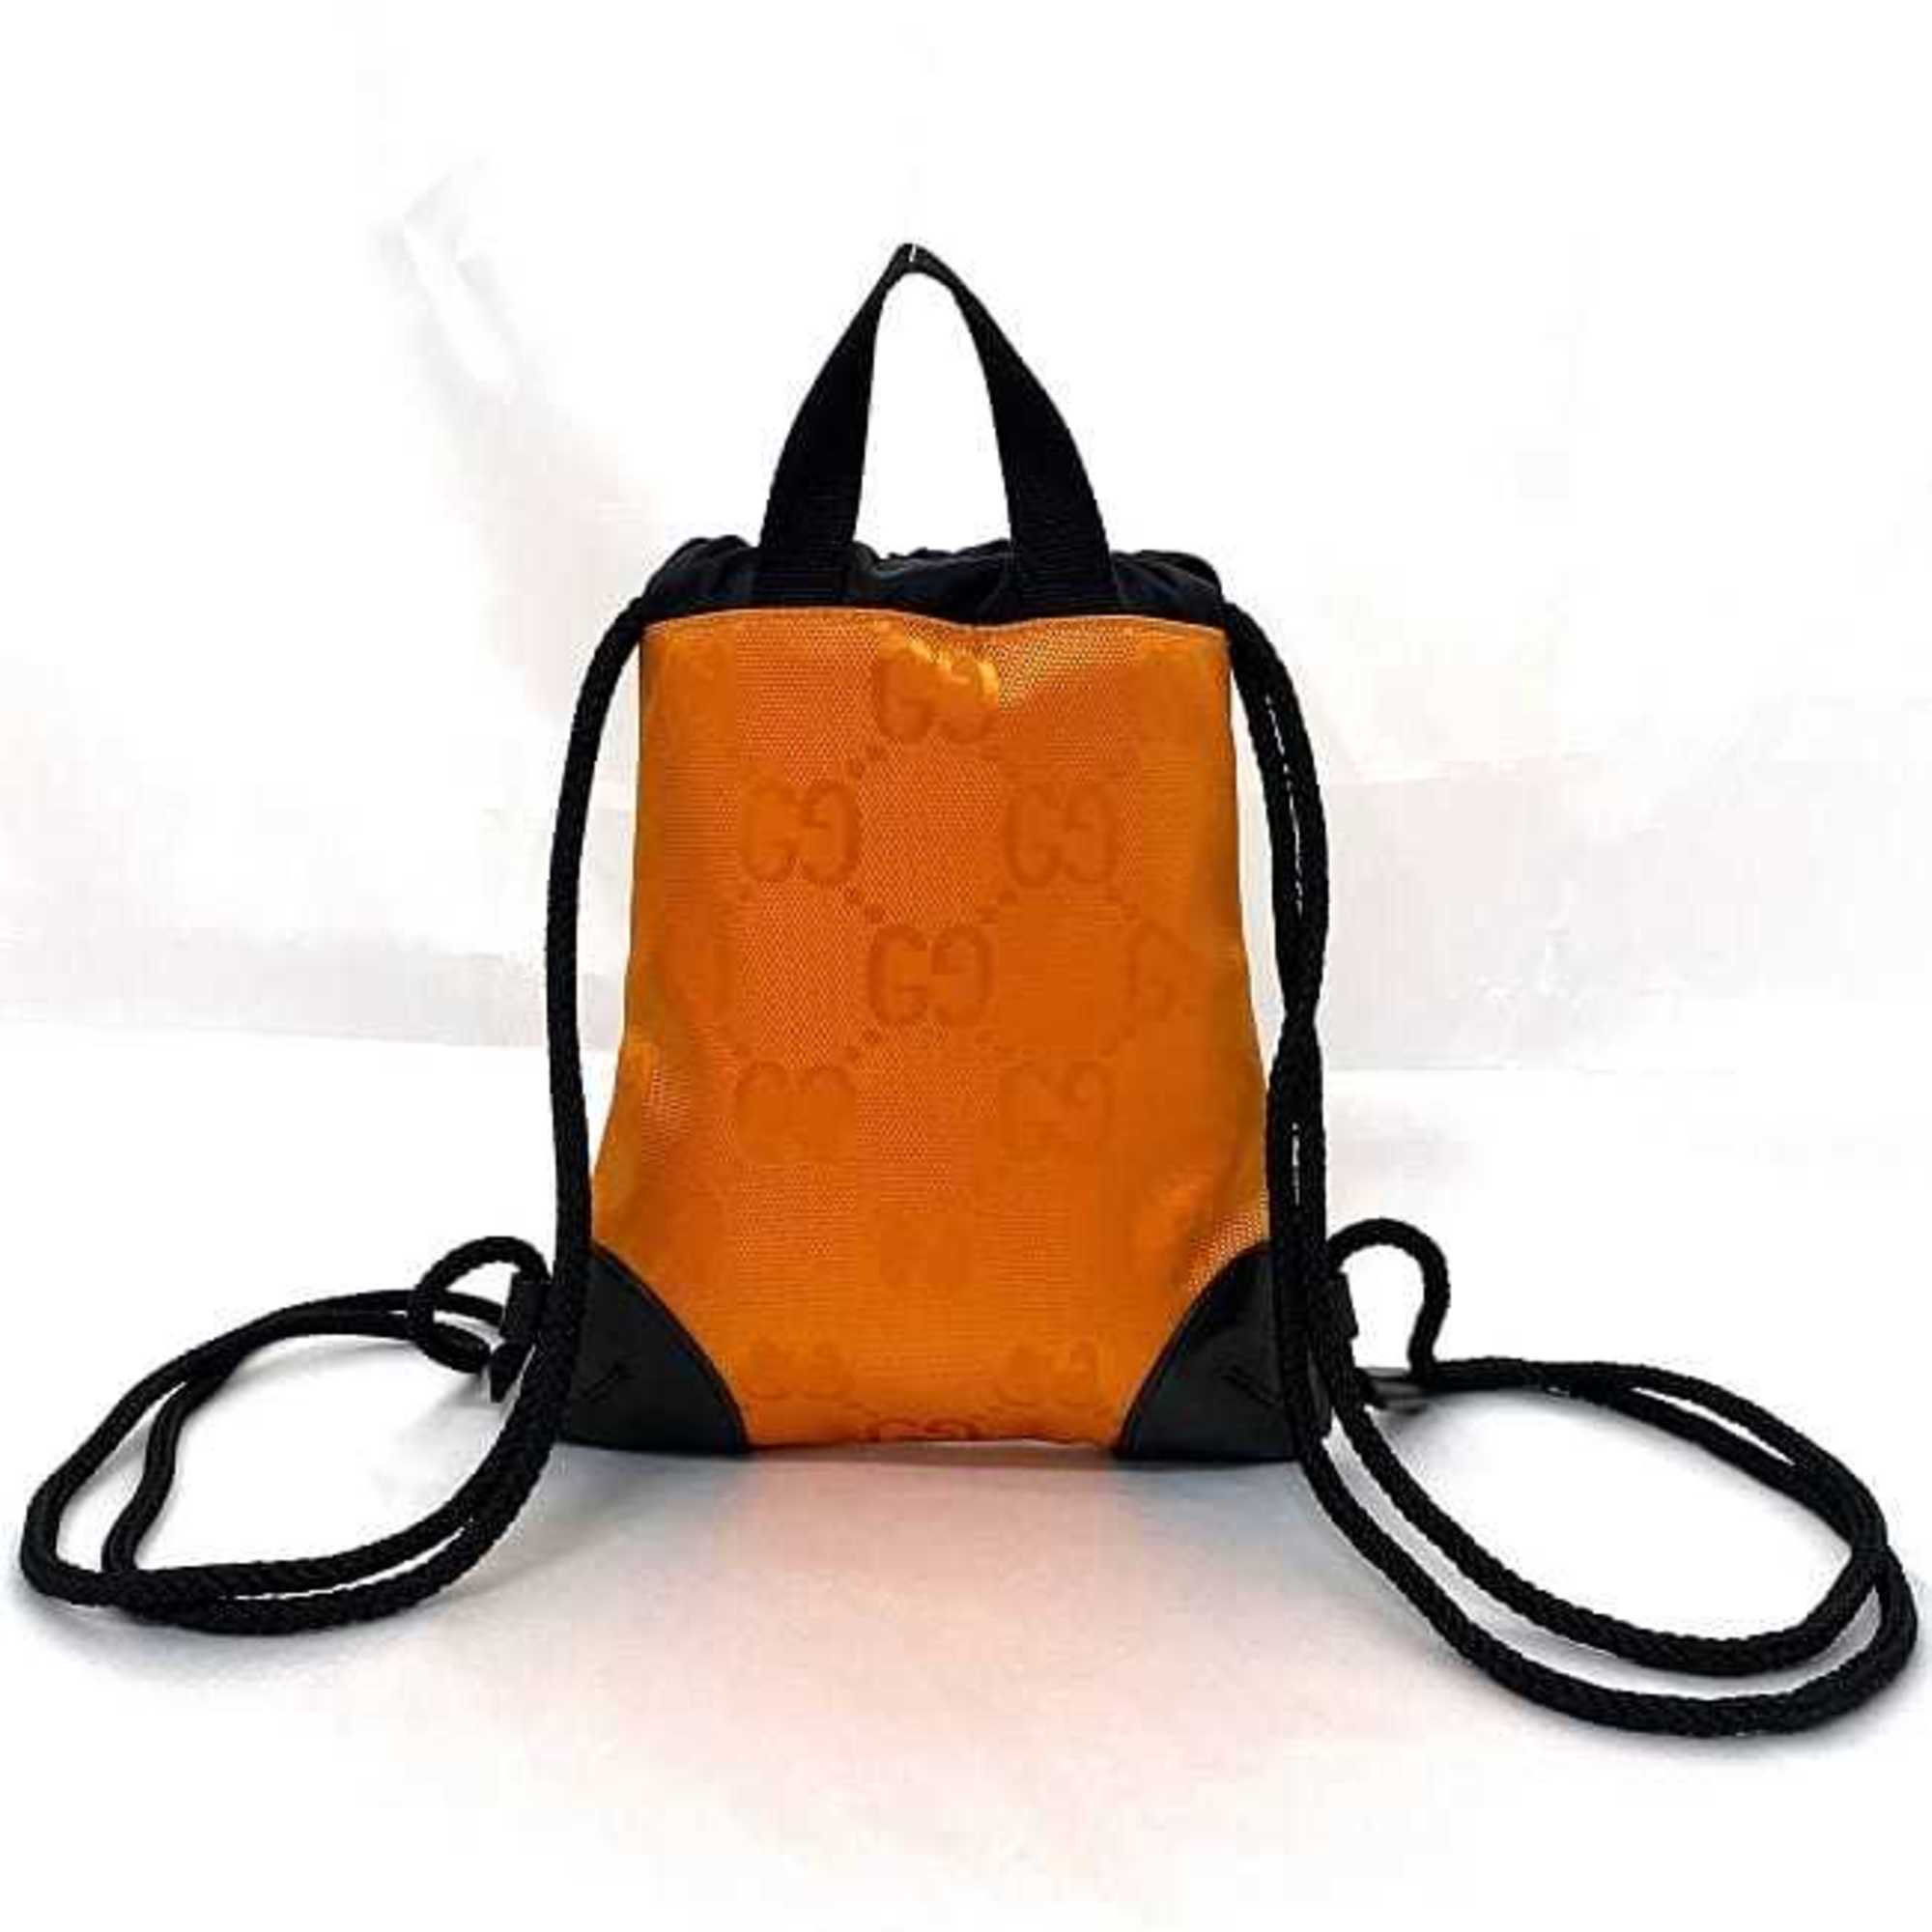 Gucci Backpack Orange Black Off The Grit 643887 Canvas Leather GUCCI GG Nylon Compact